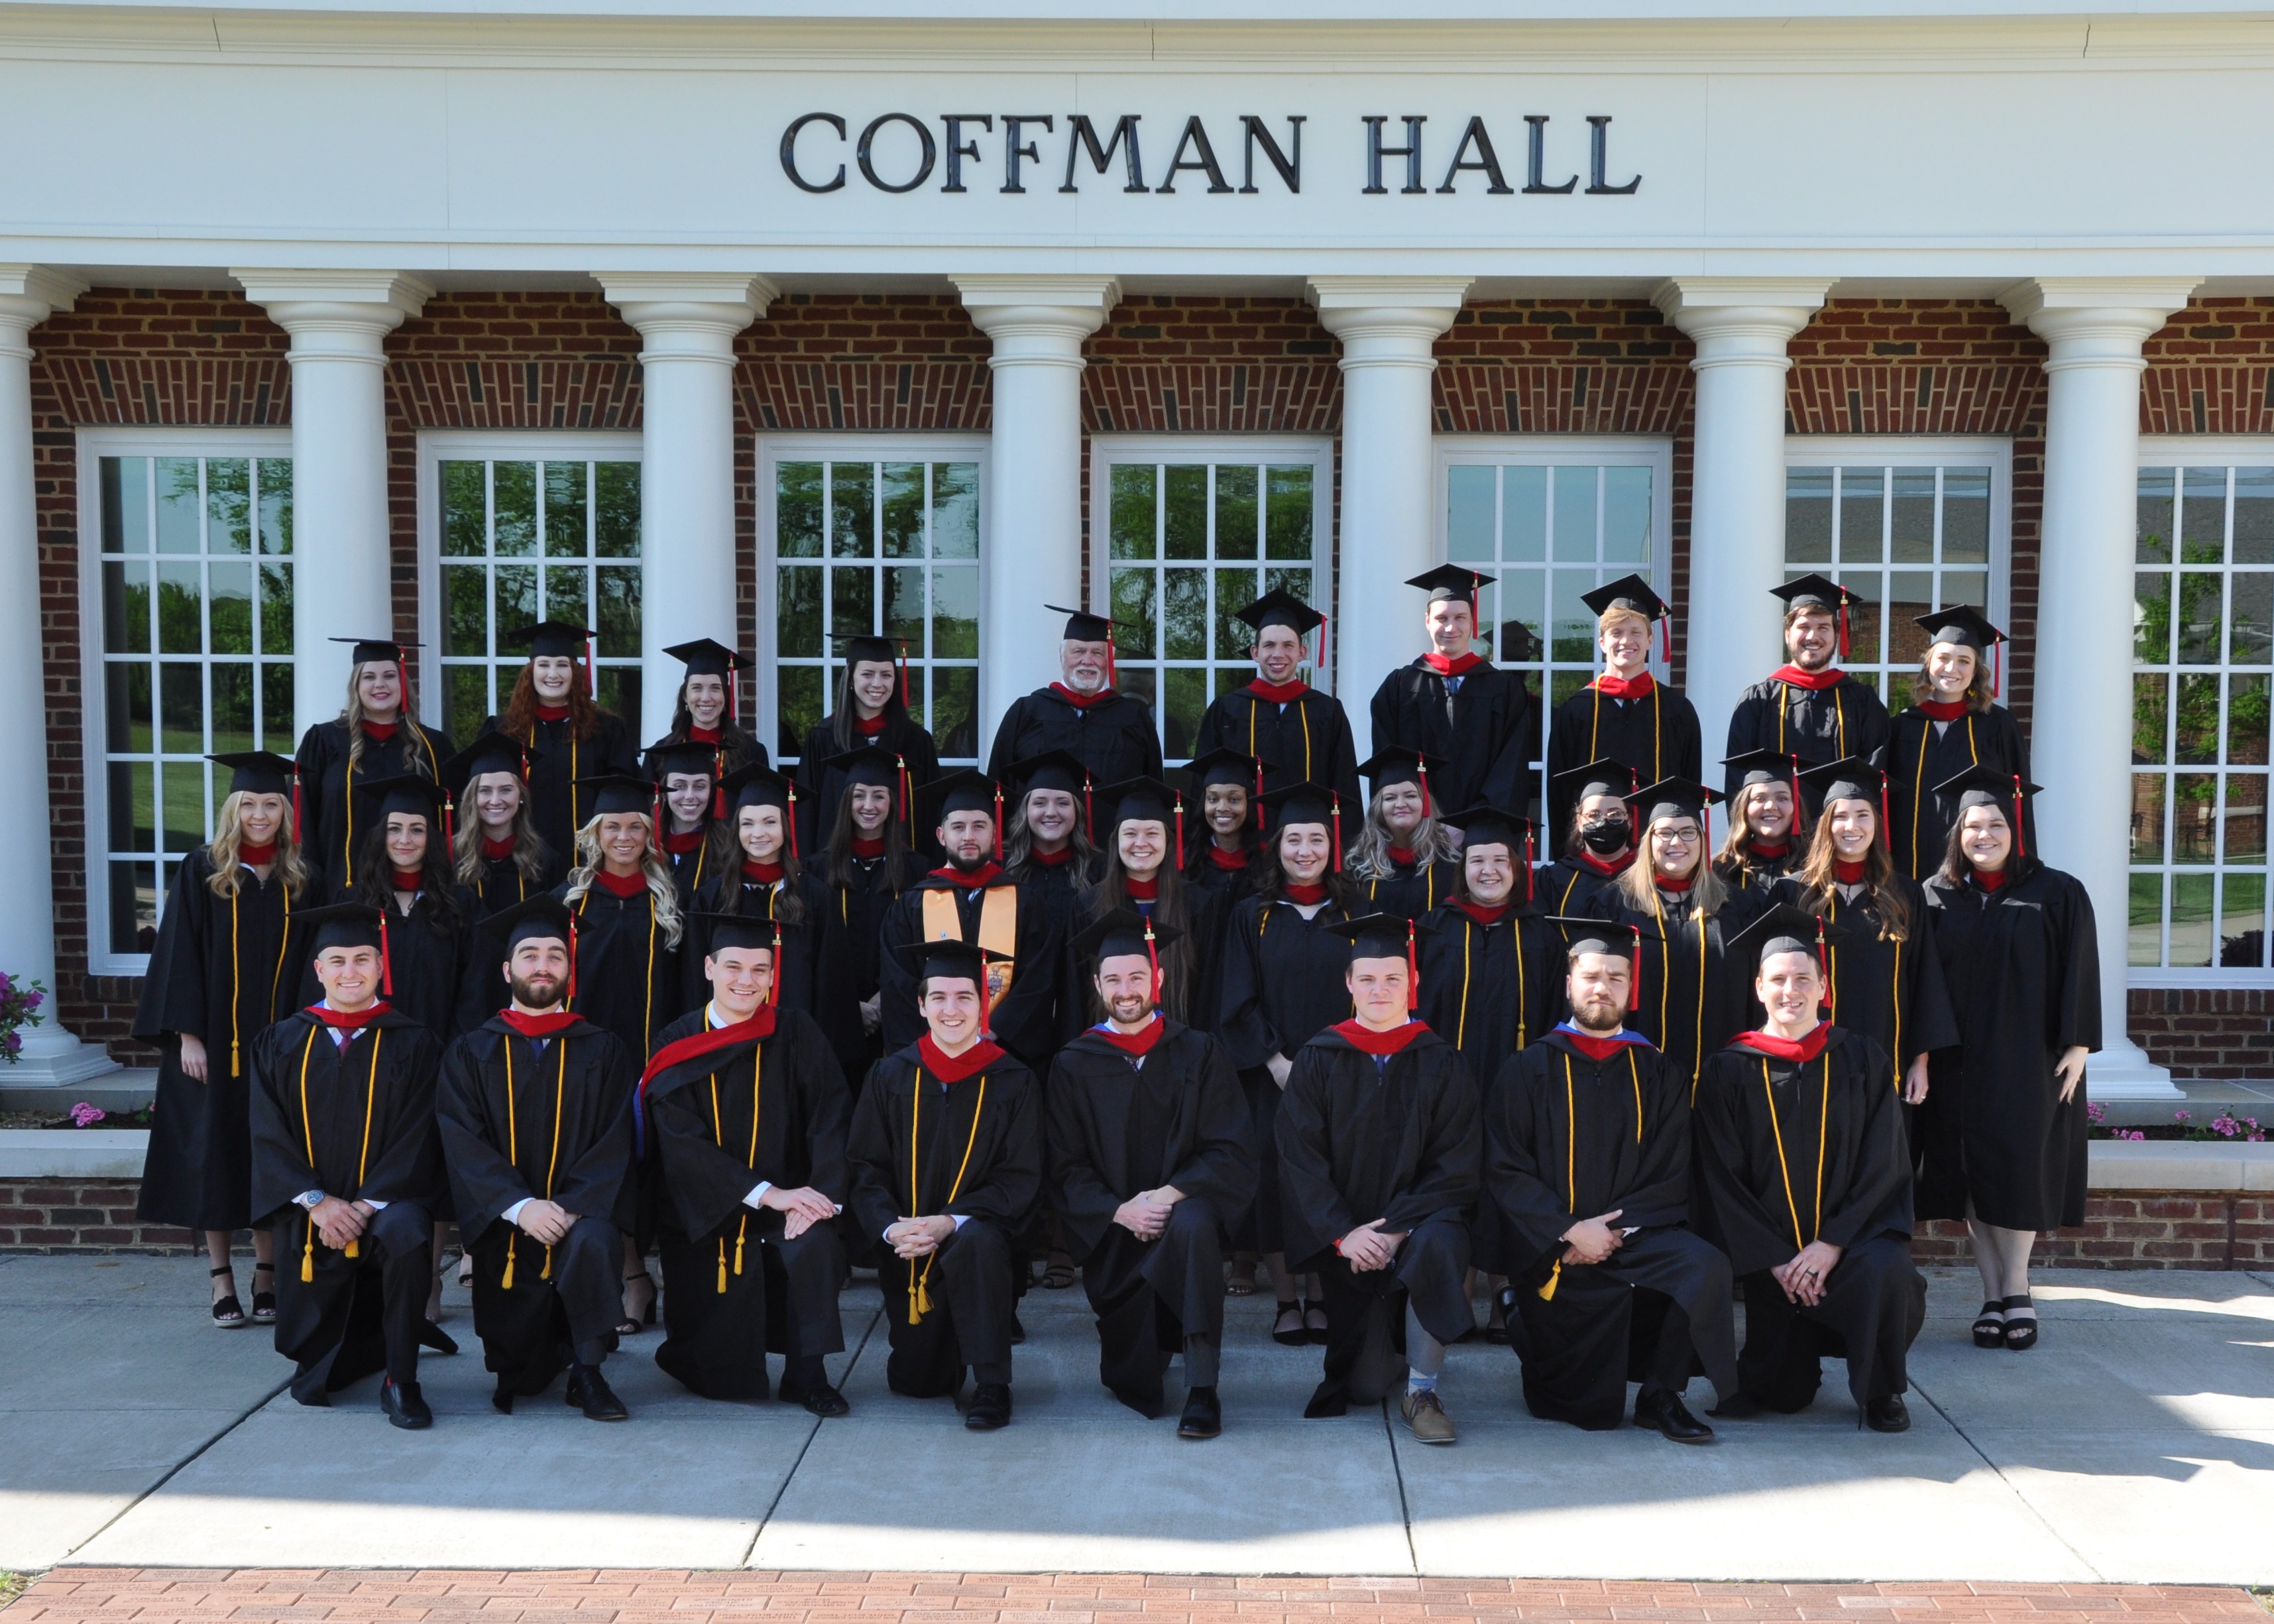 Welch College Graduates 68 in Class of 2021 in Commencement Exercises